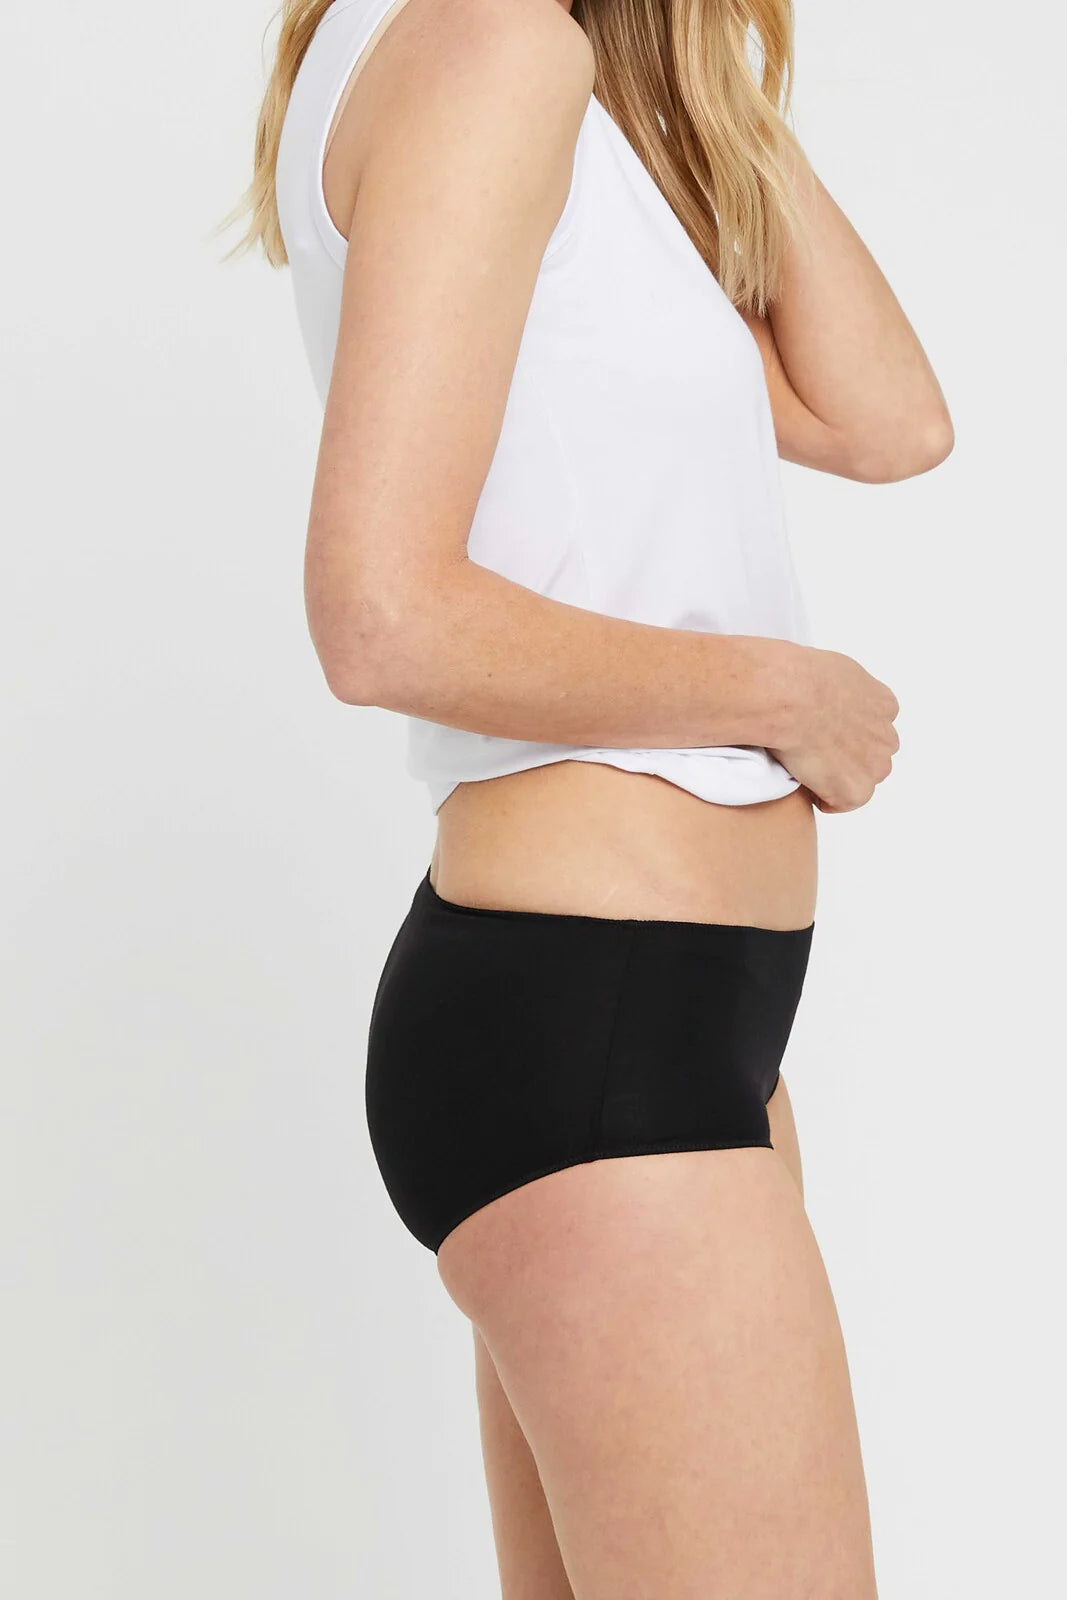 &quot;Bamboo women&#39;s underwear in black: Eco-friendly and luxurious for everyday wear.&quot;